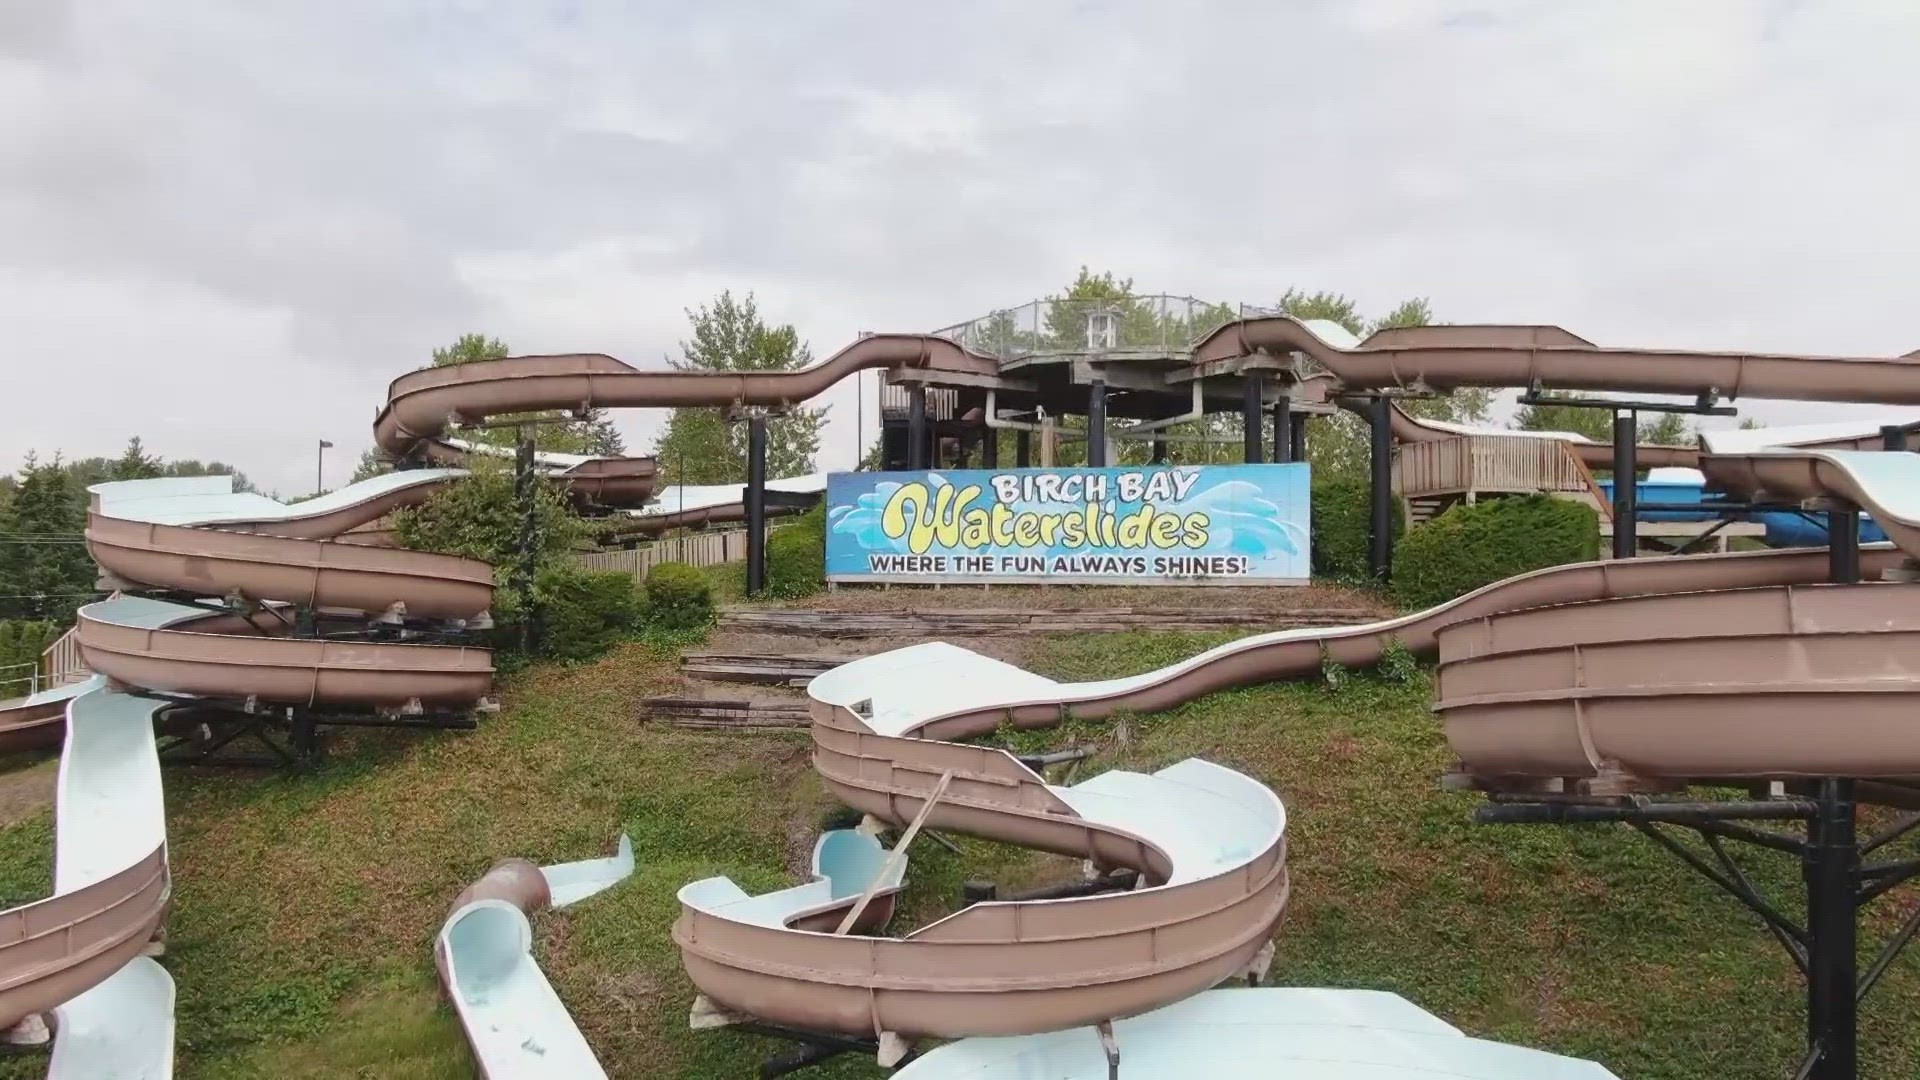 After an incident on Aug. 25, the Birch Bay Waterslides park closed for the season. The injured man is at Harborview Medical Center and is expected to survive.